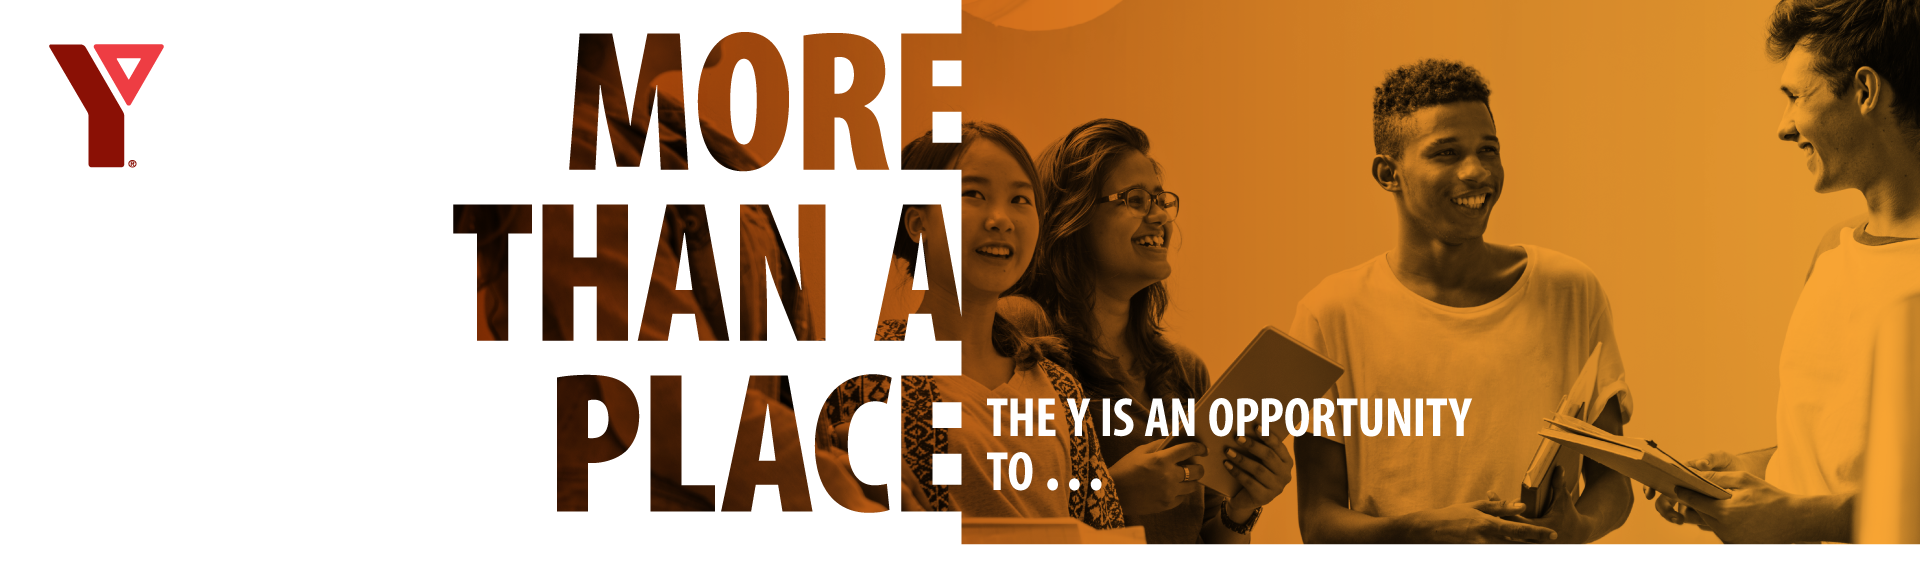 More than a Place; the Y is and opportunity to...